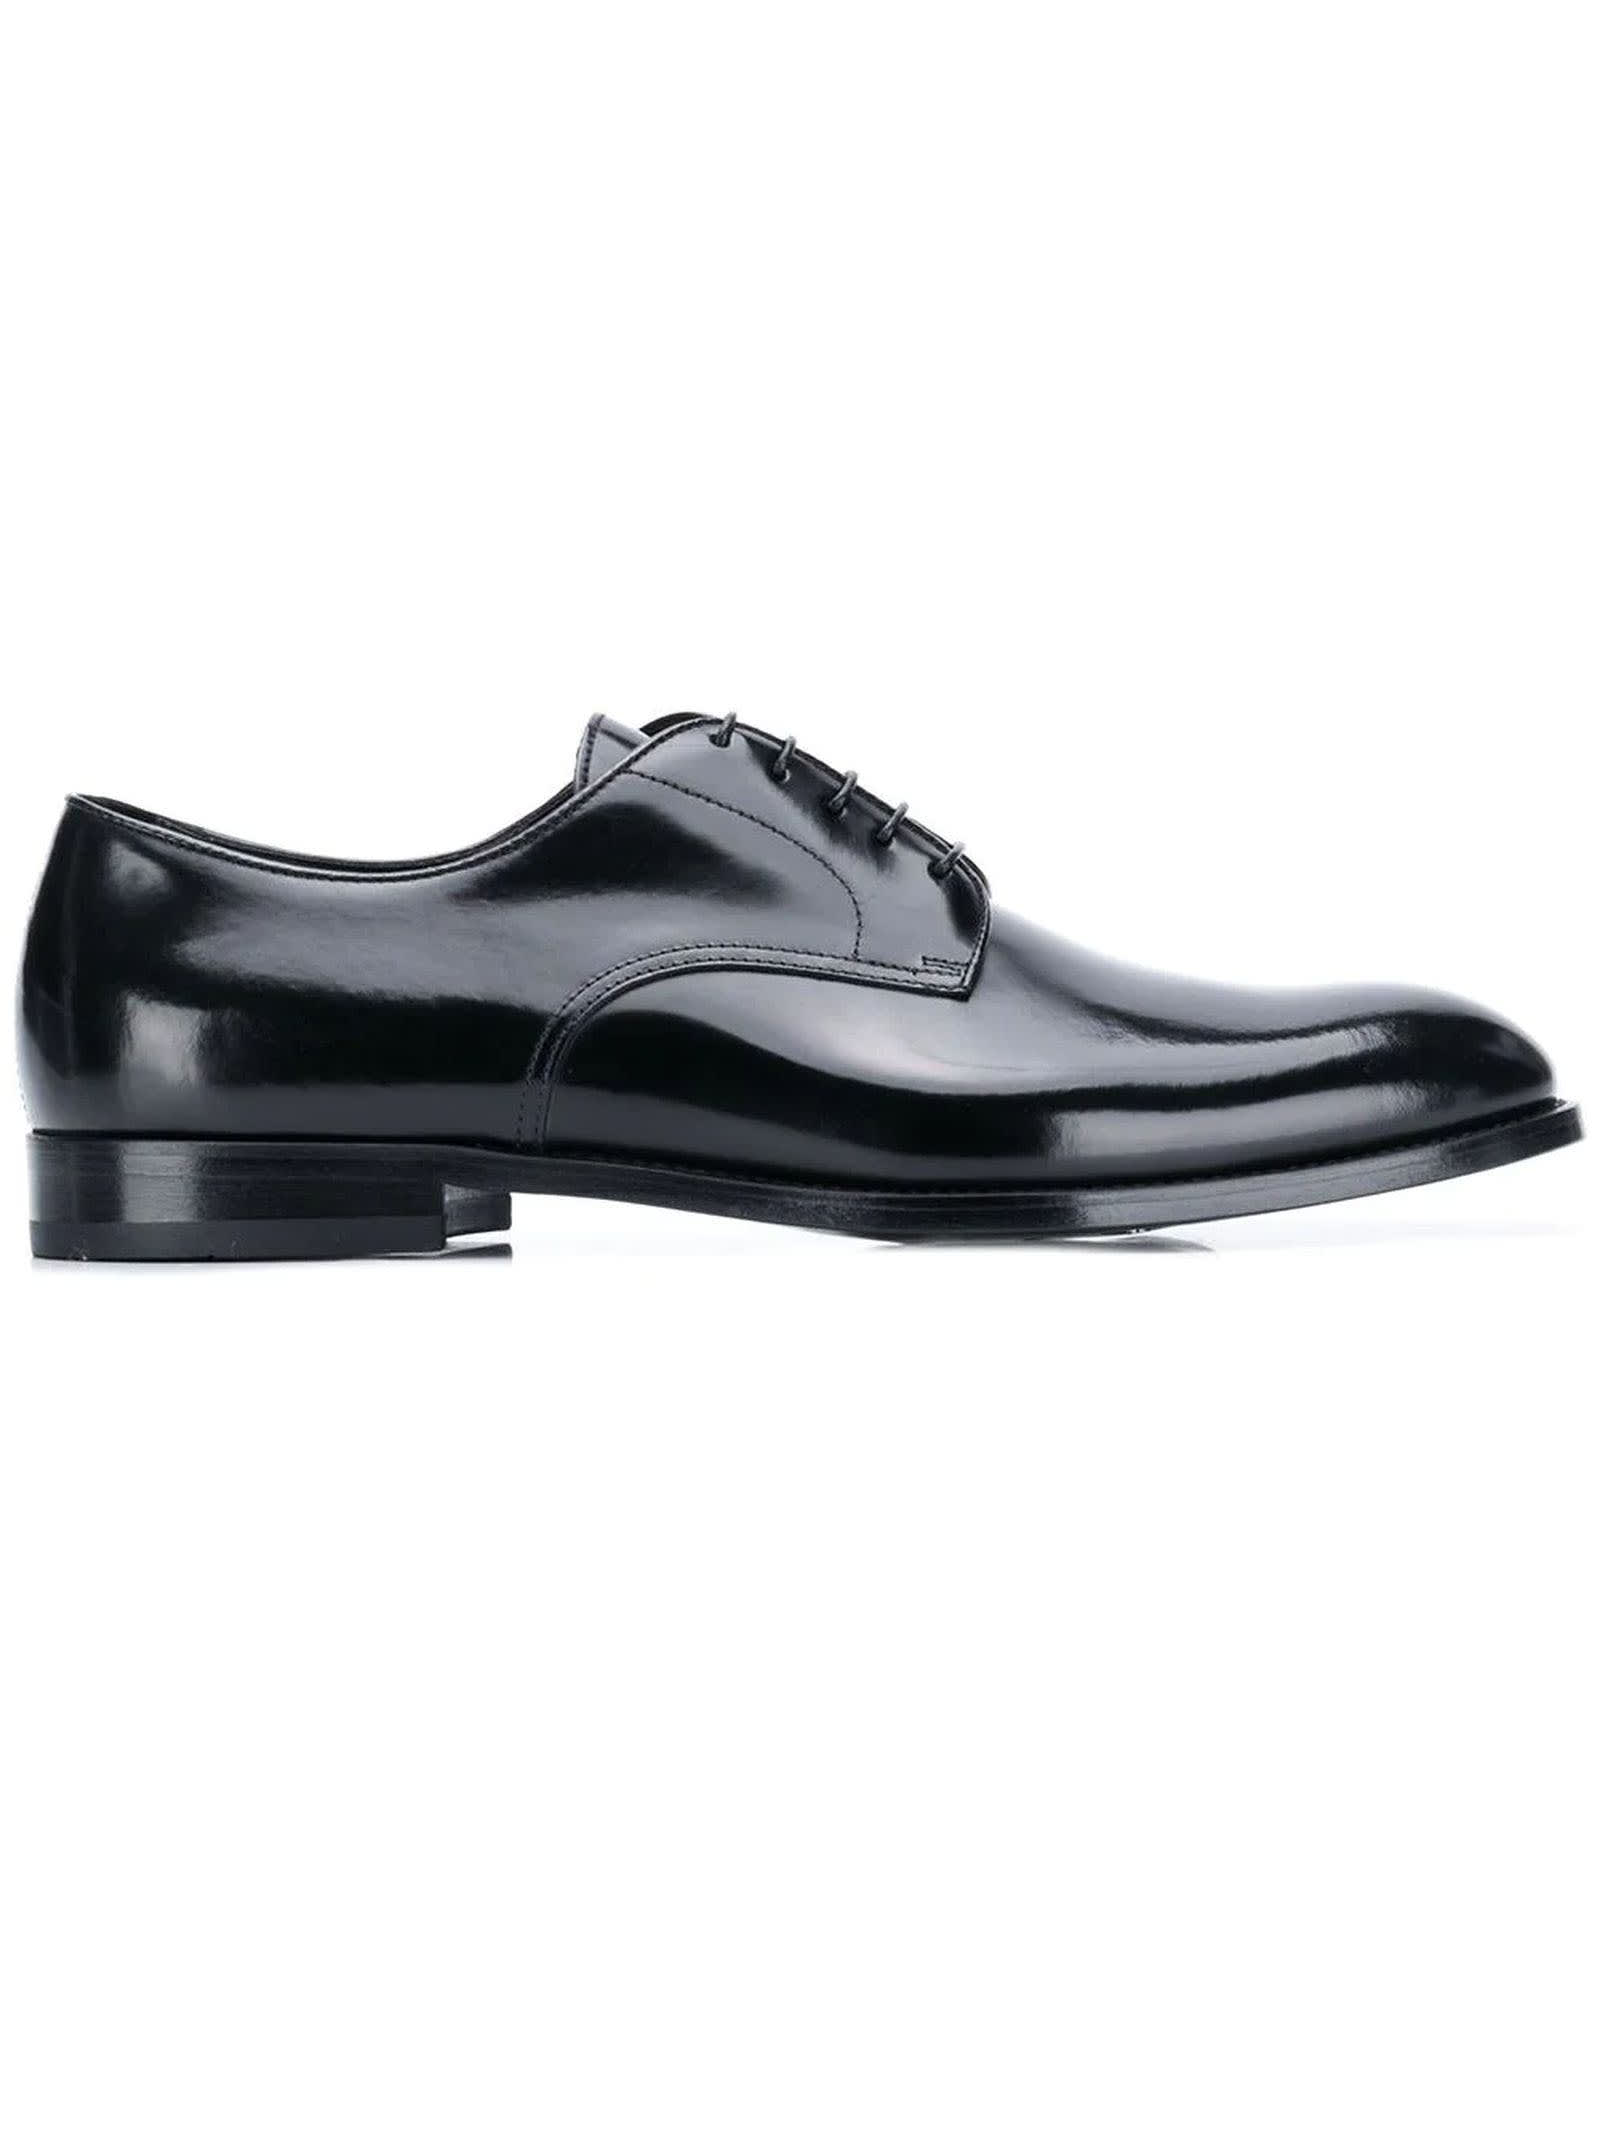 Doucal's Black Leather Classic Derby Shoes